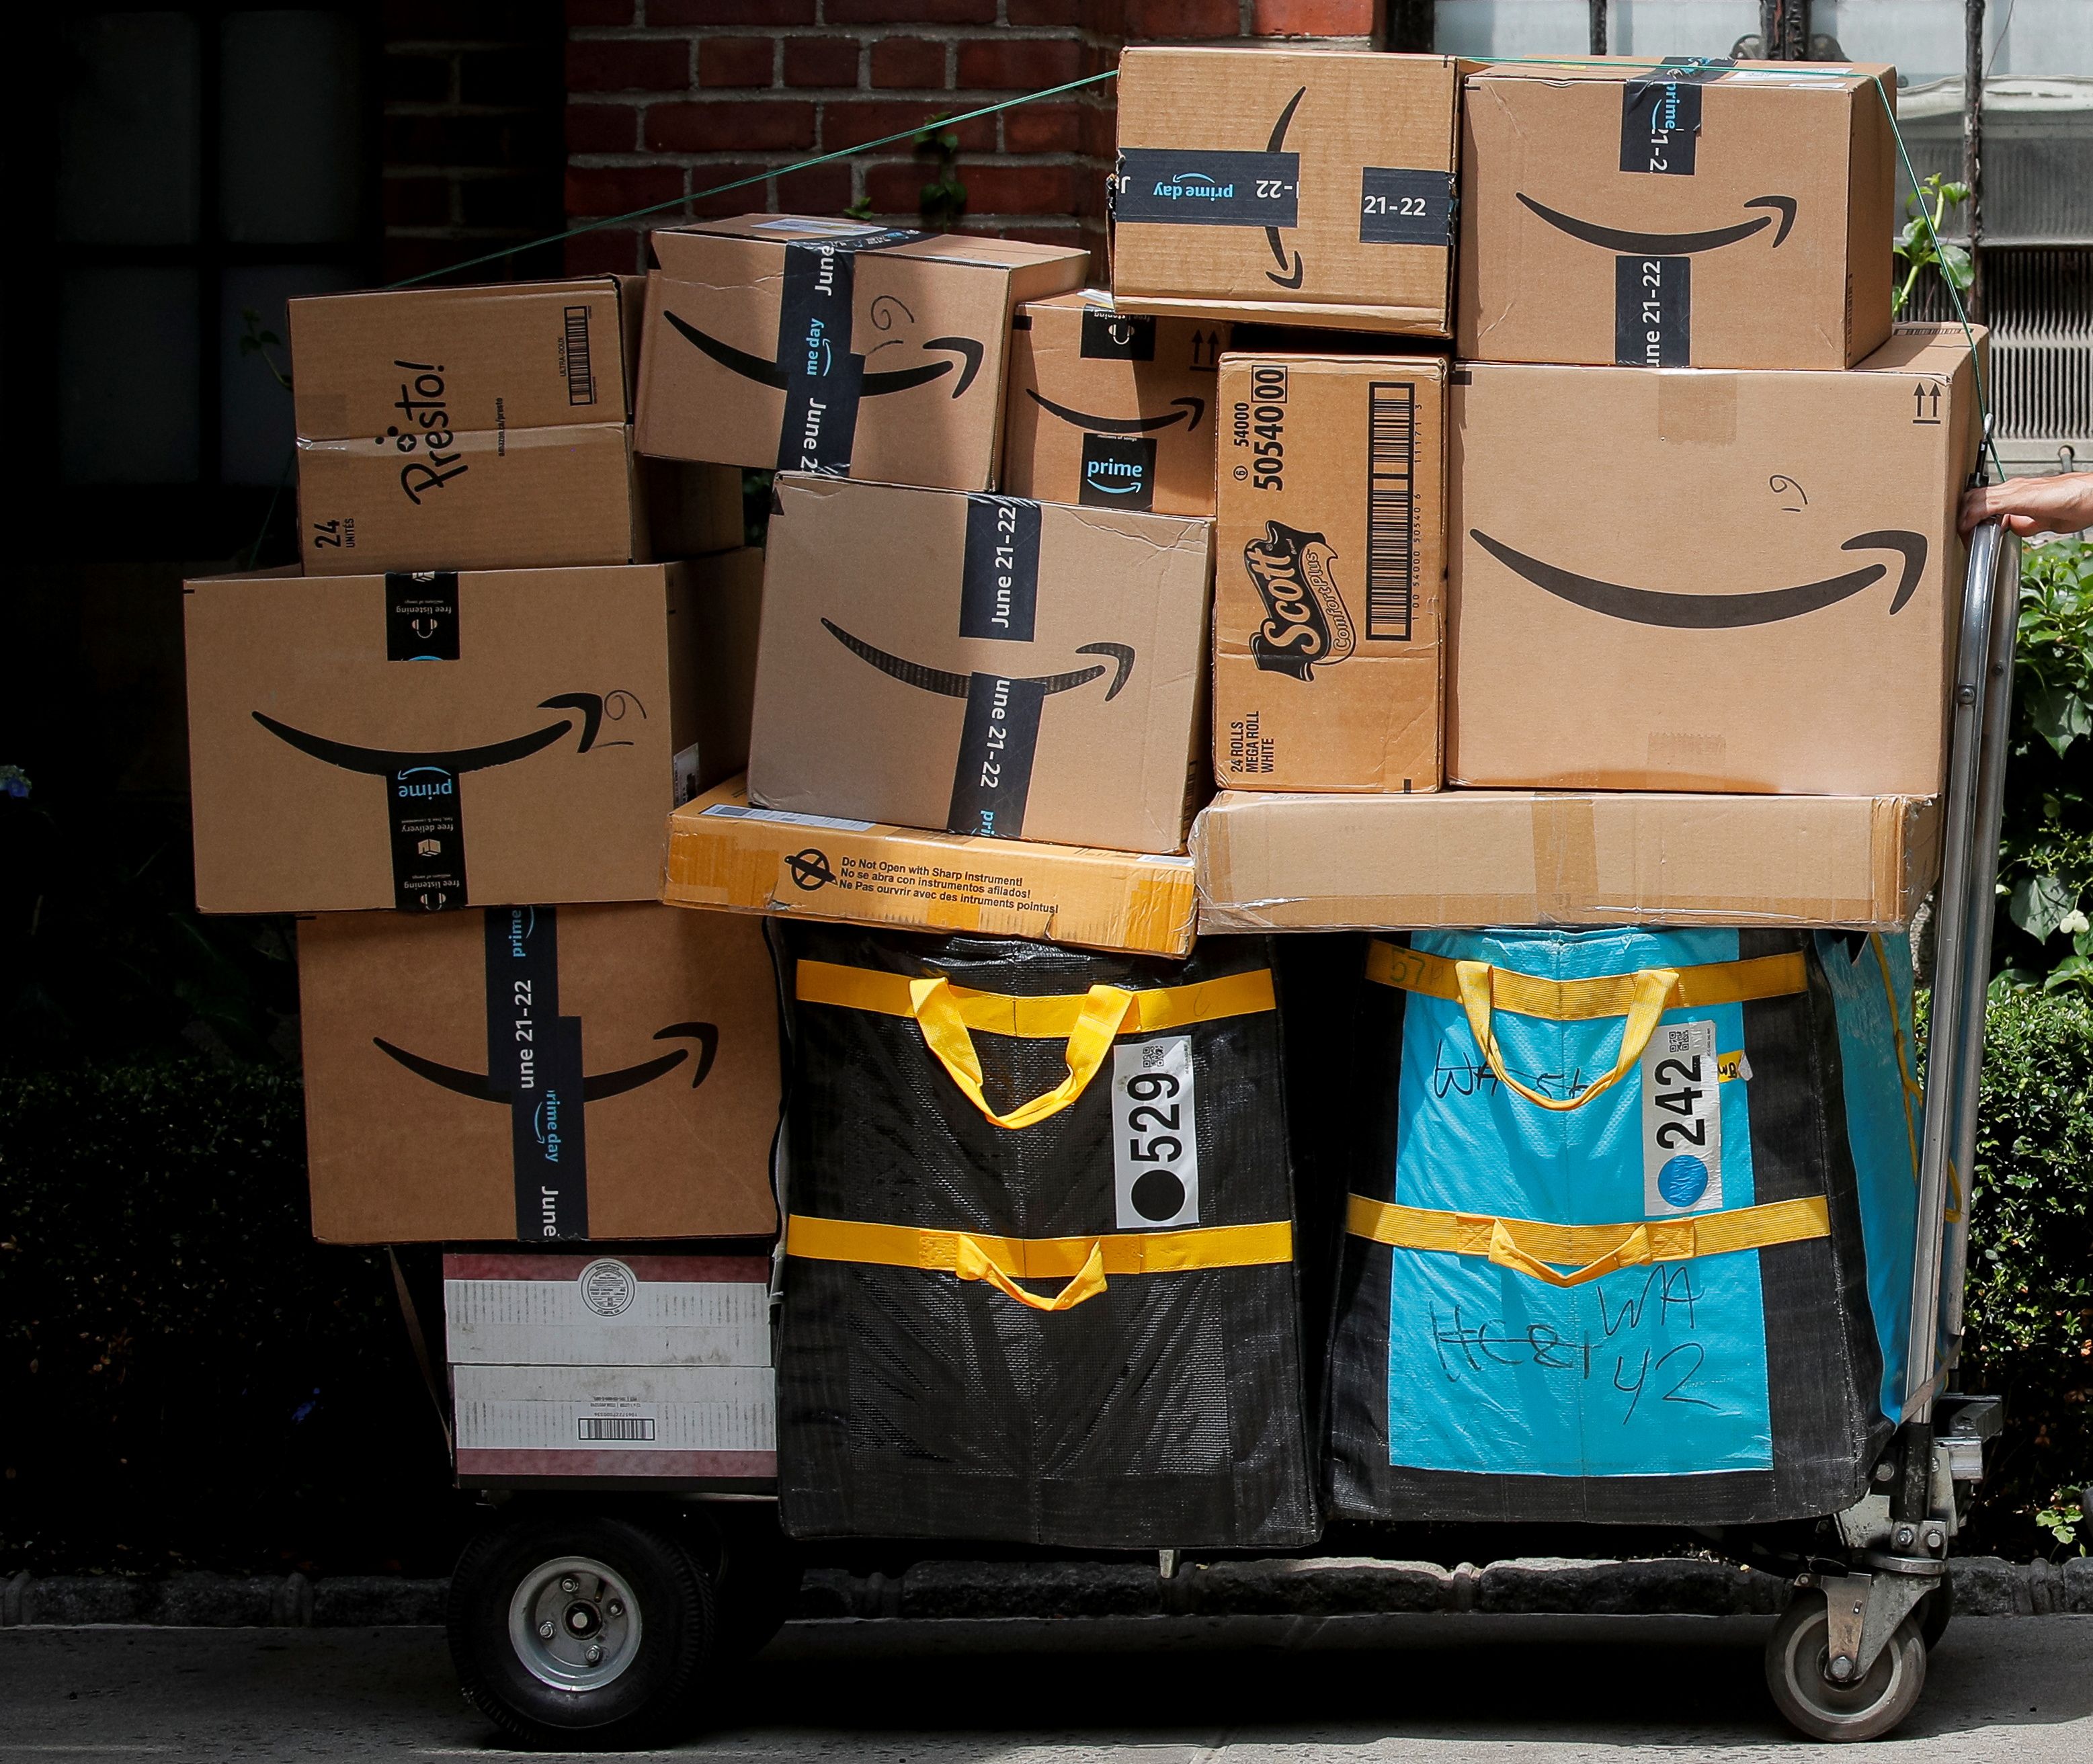 Big U S Retailers Line Up Deals To Take On Amazon Prime Day Frenzy Reuters